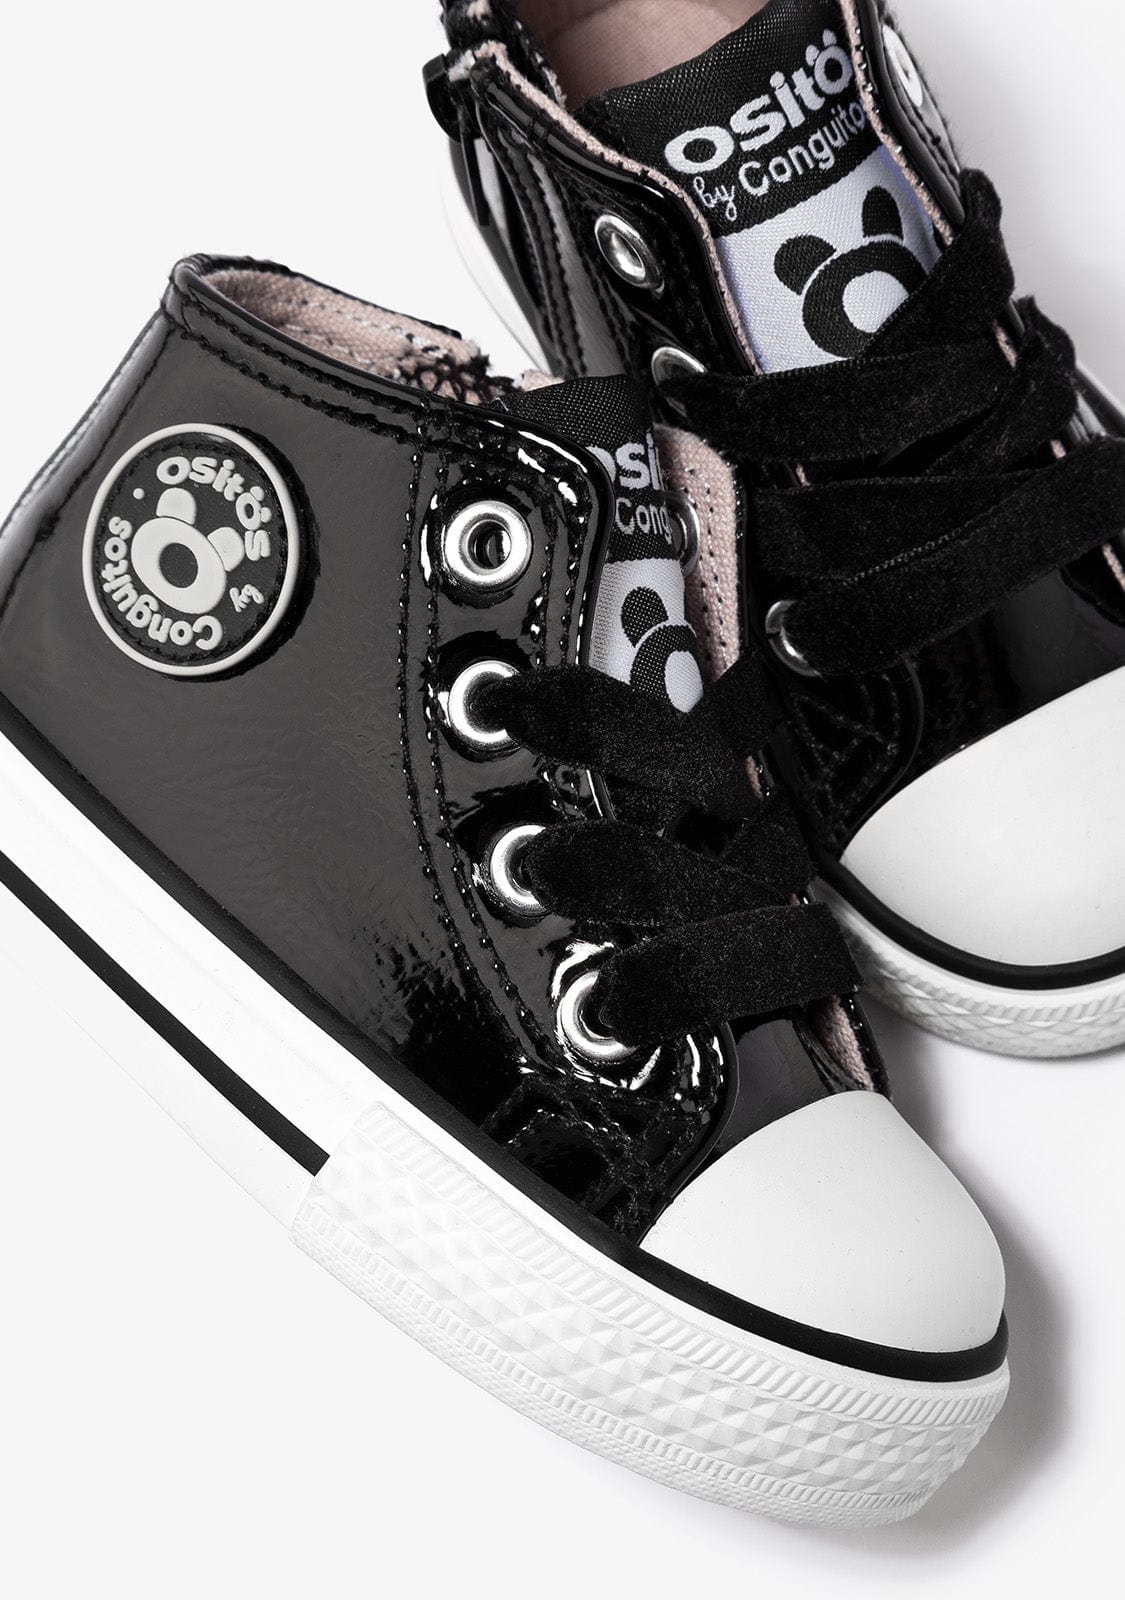 OSITO Shoes Baby's Black Patent Leather Hi-Top Sneakers